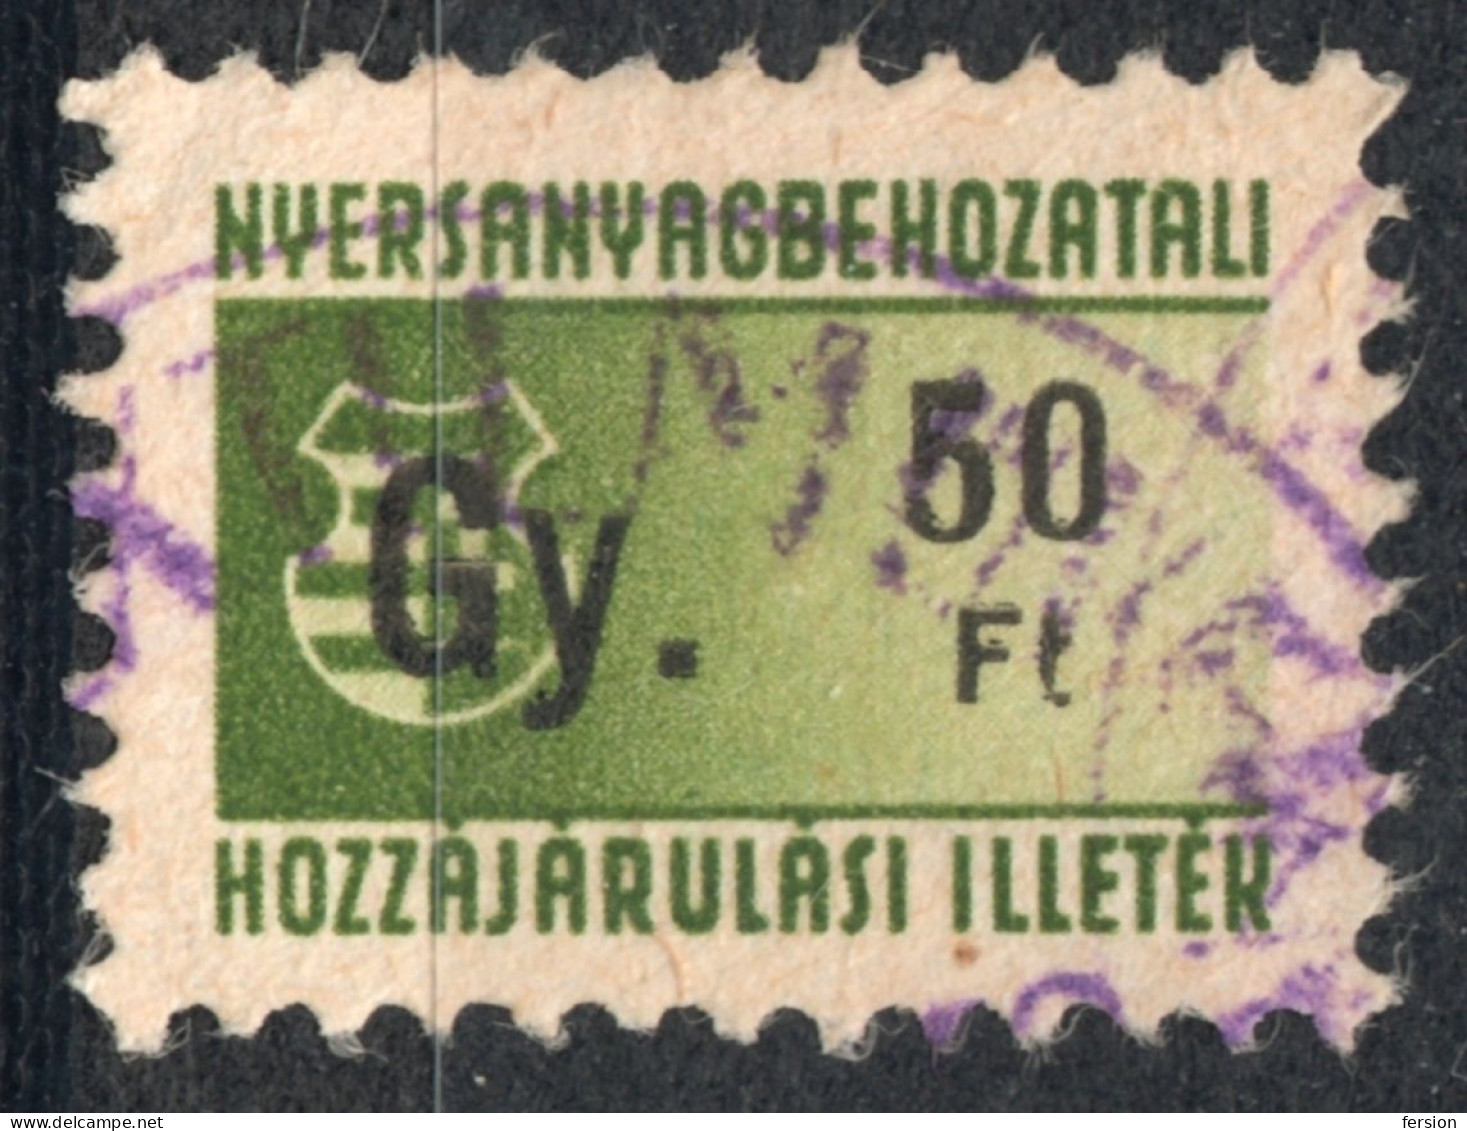 1948 Hungary - Wool Import Tax -  FISCAL BILL - Revenue Stamp - 50 Ft - Used - RR! - KOSSUTH Coat Of Arms - Fiscale Zegels